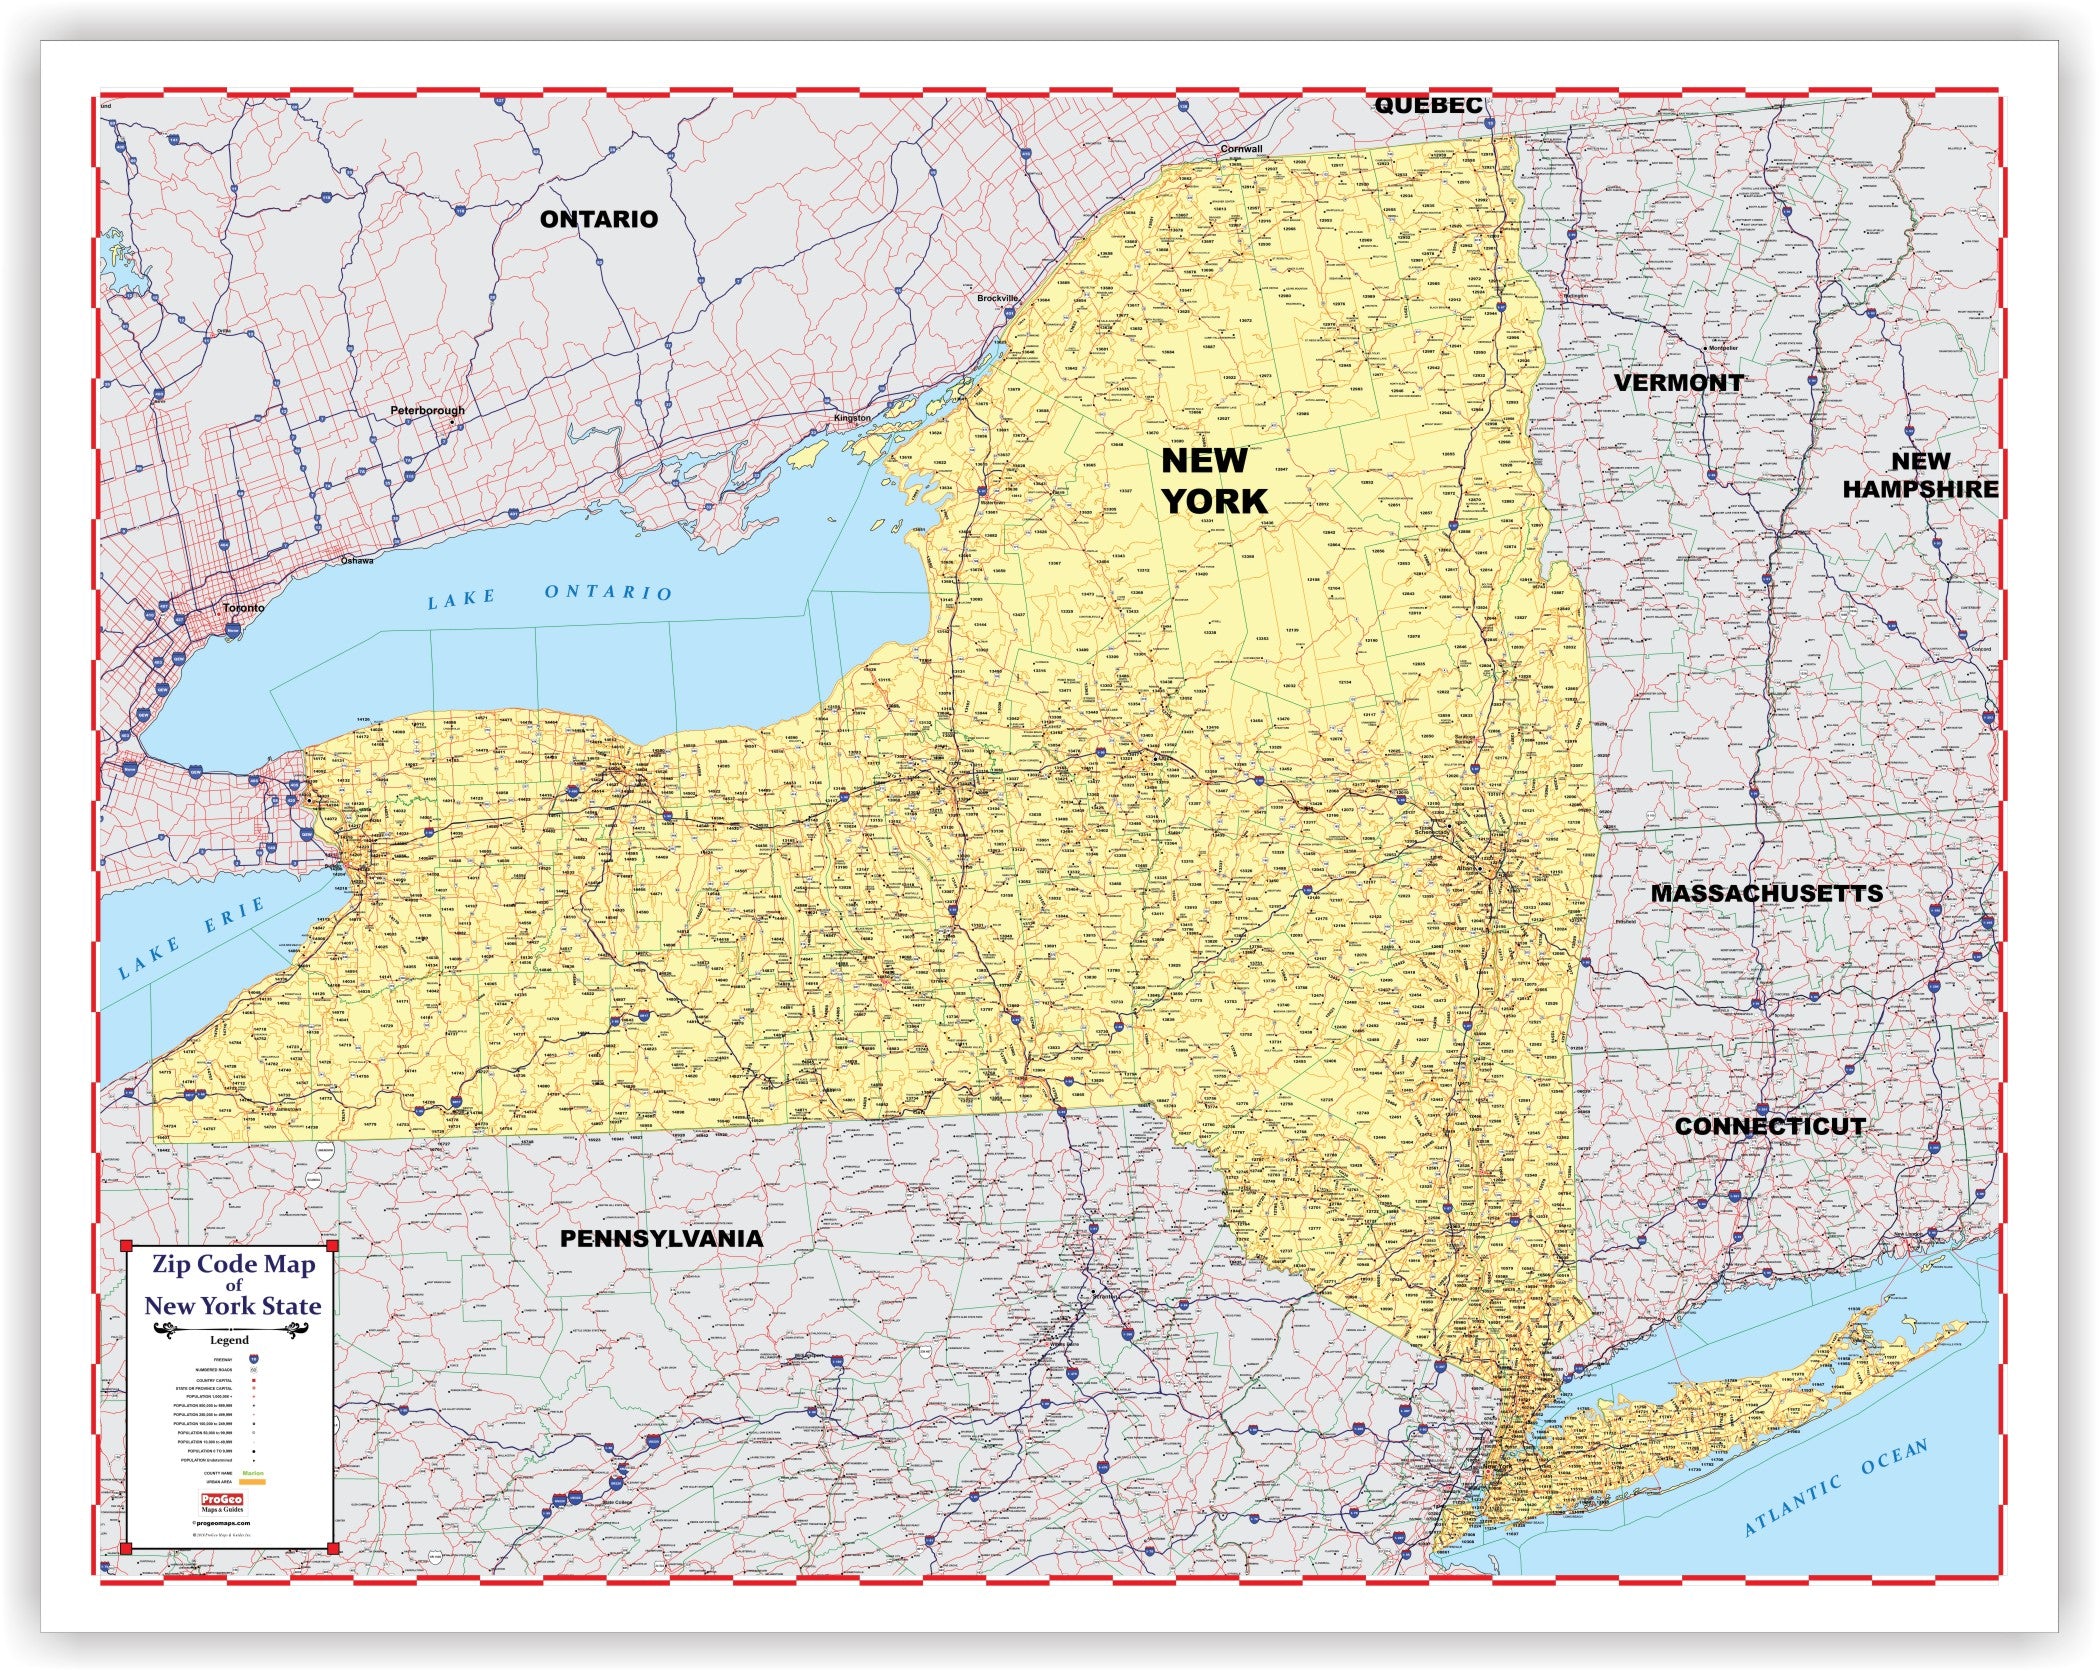 New York State Zip Code Map | Campus Map